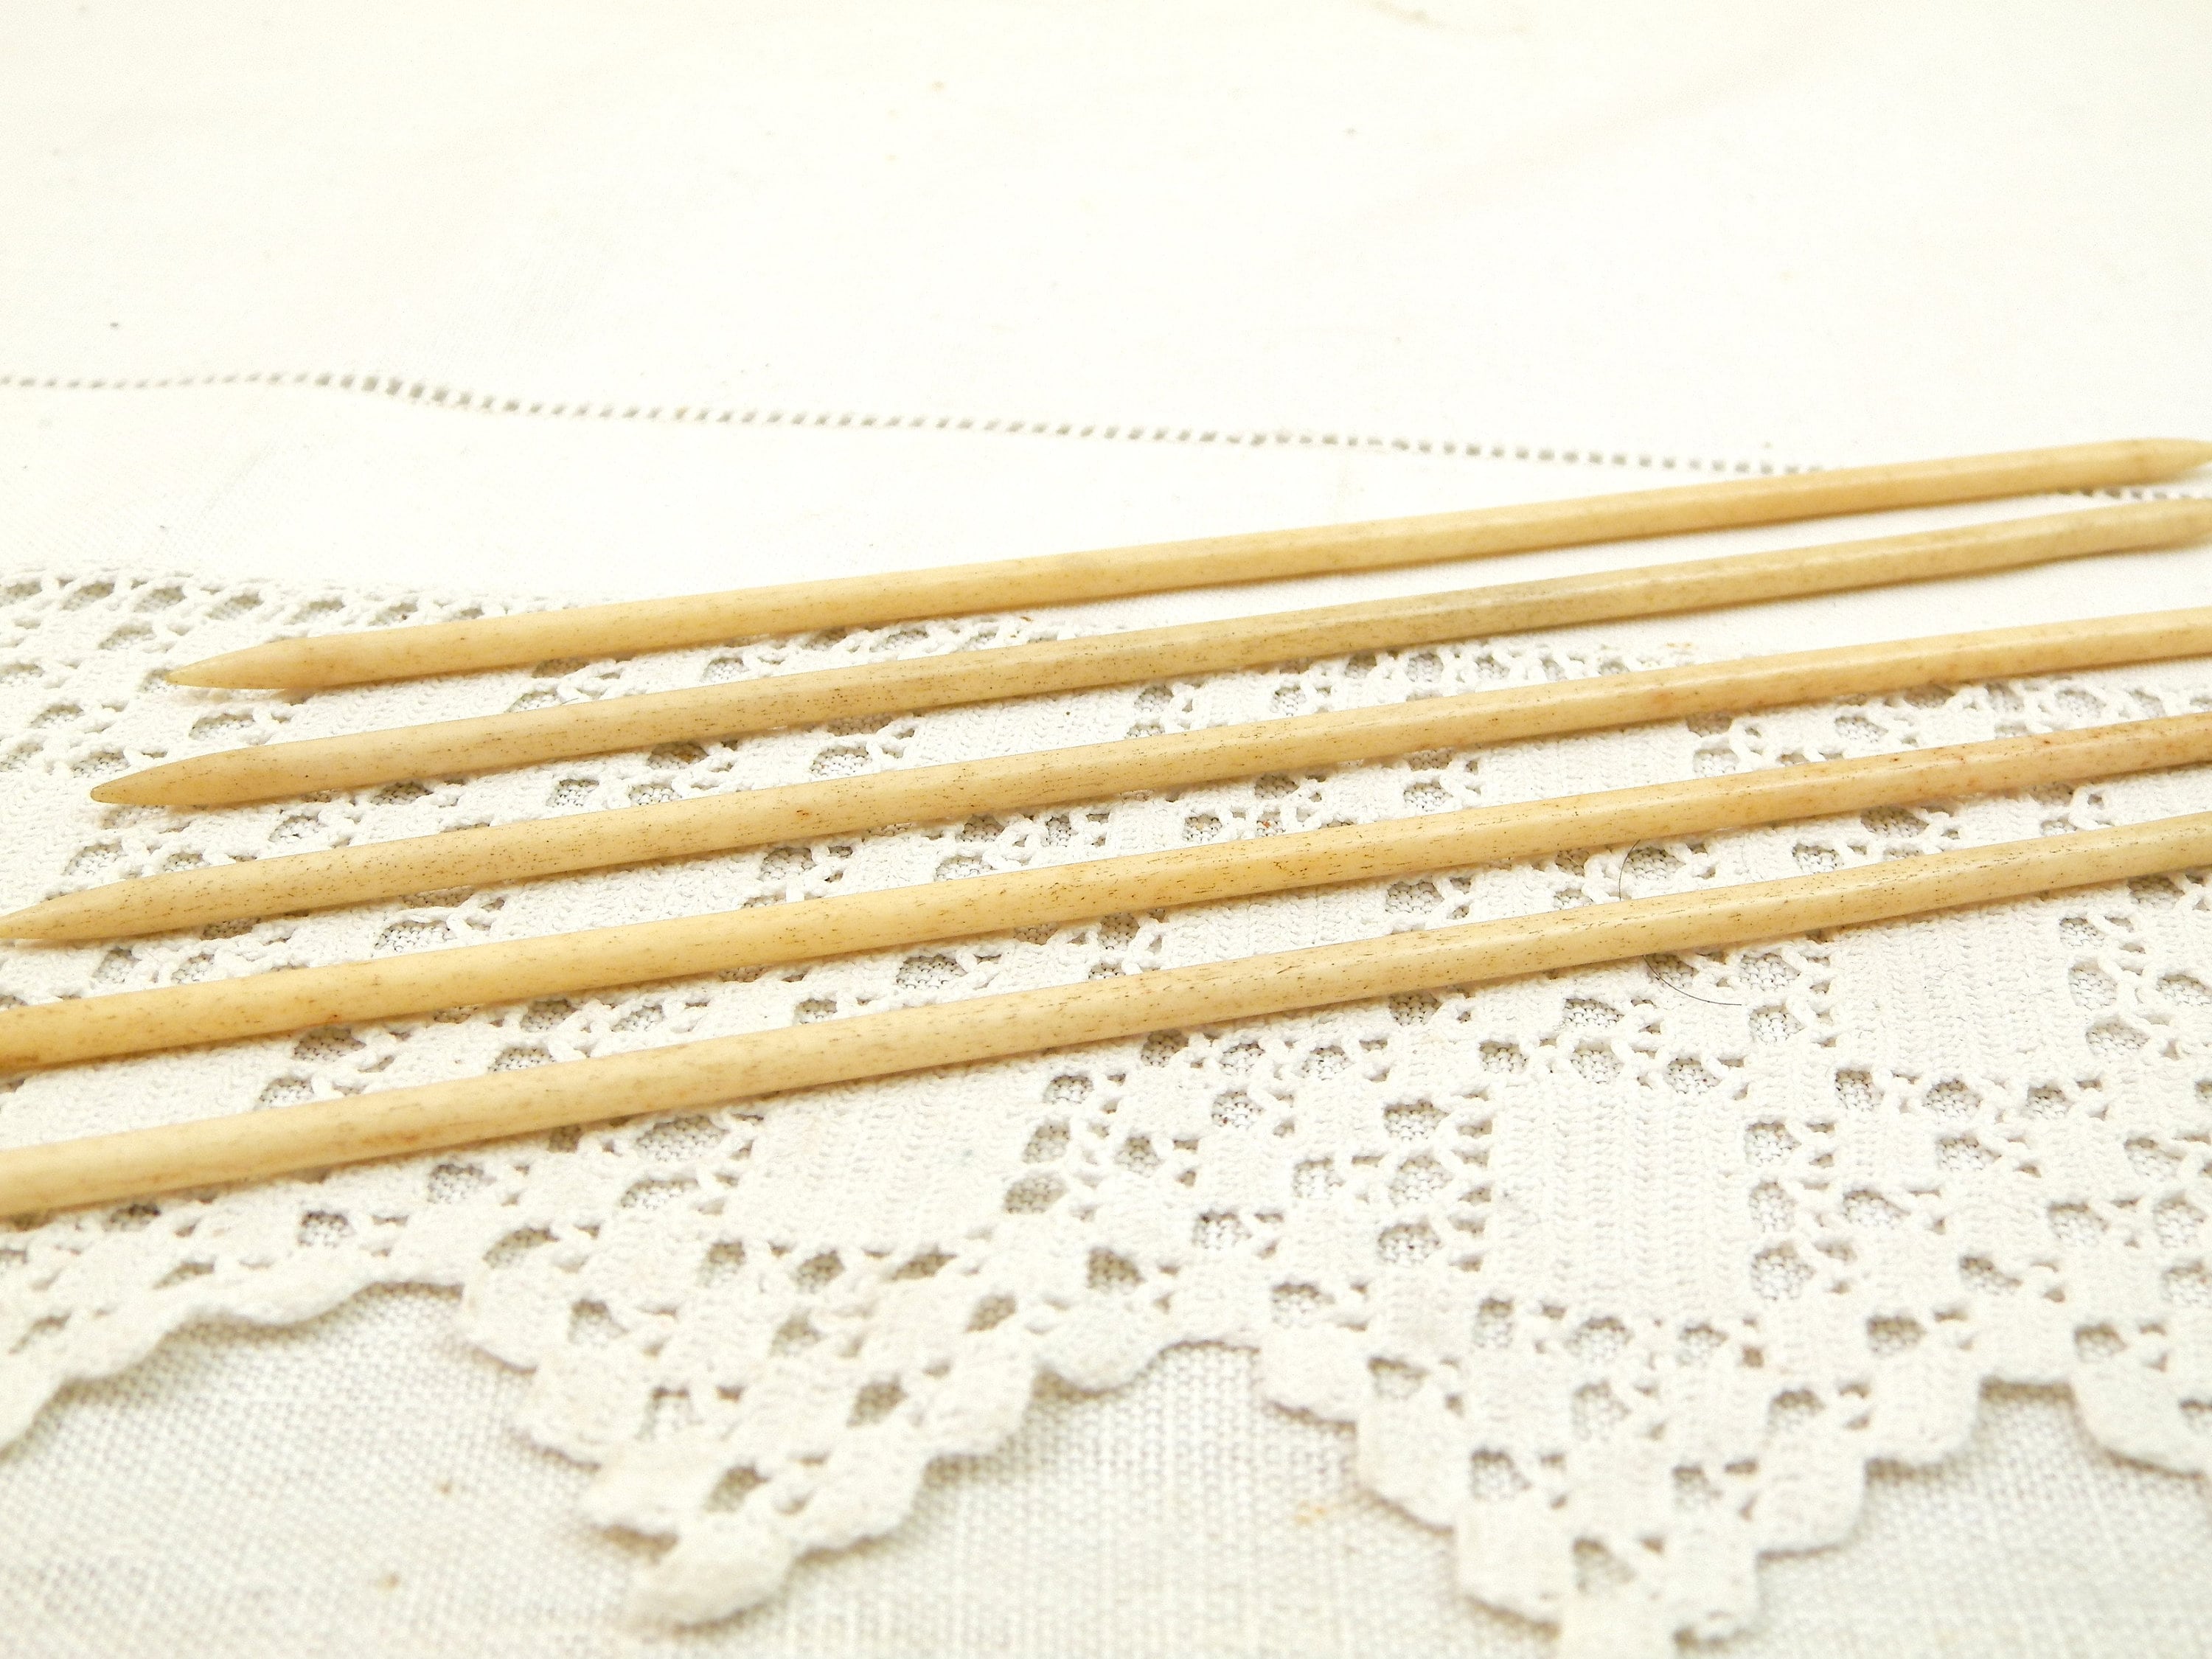 3 Sets of Vintage Double Pointed Knitting Needles in packages